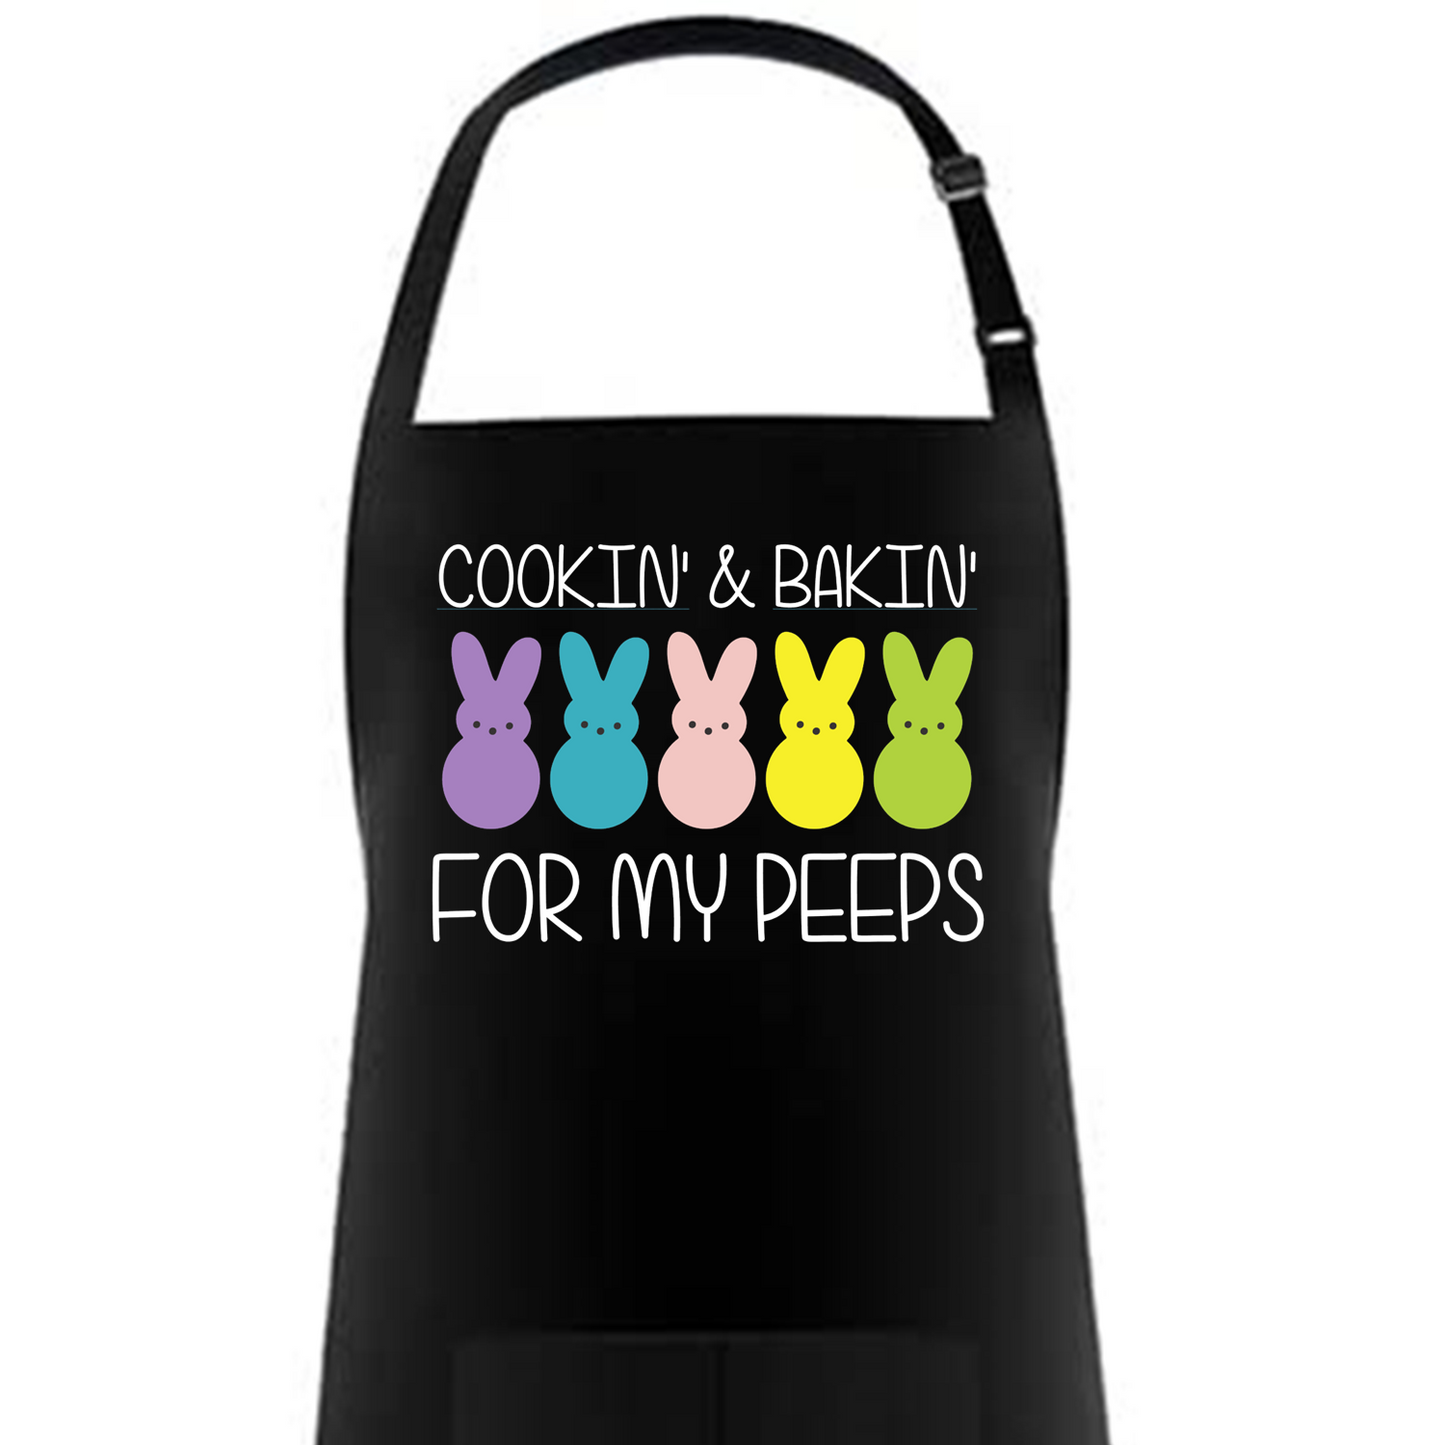 Easter Apron - Cookin' and Bakin' for my PEEPS